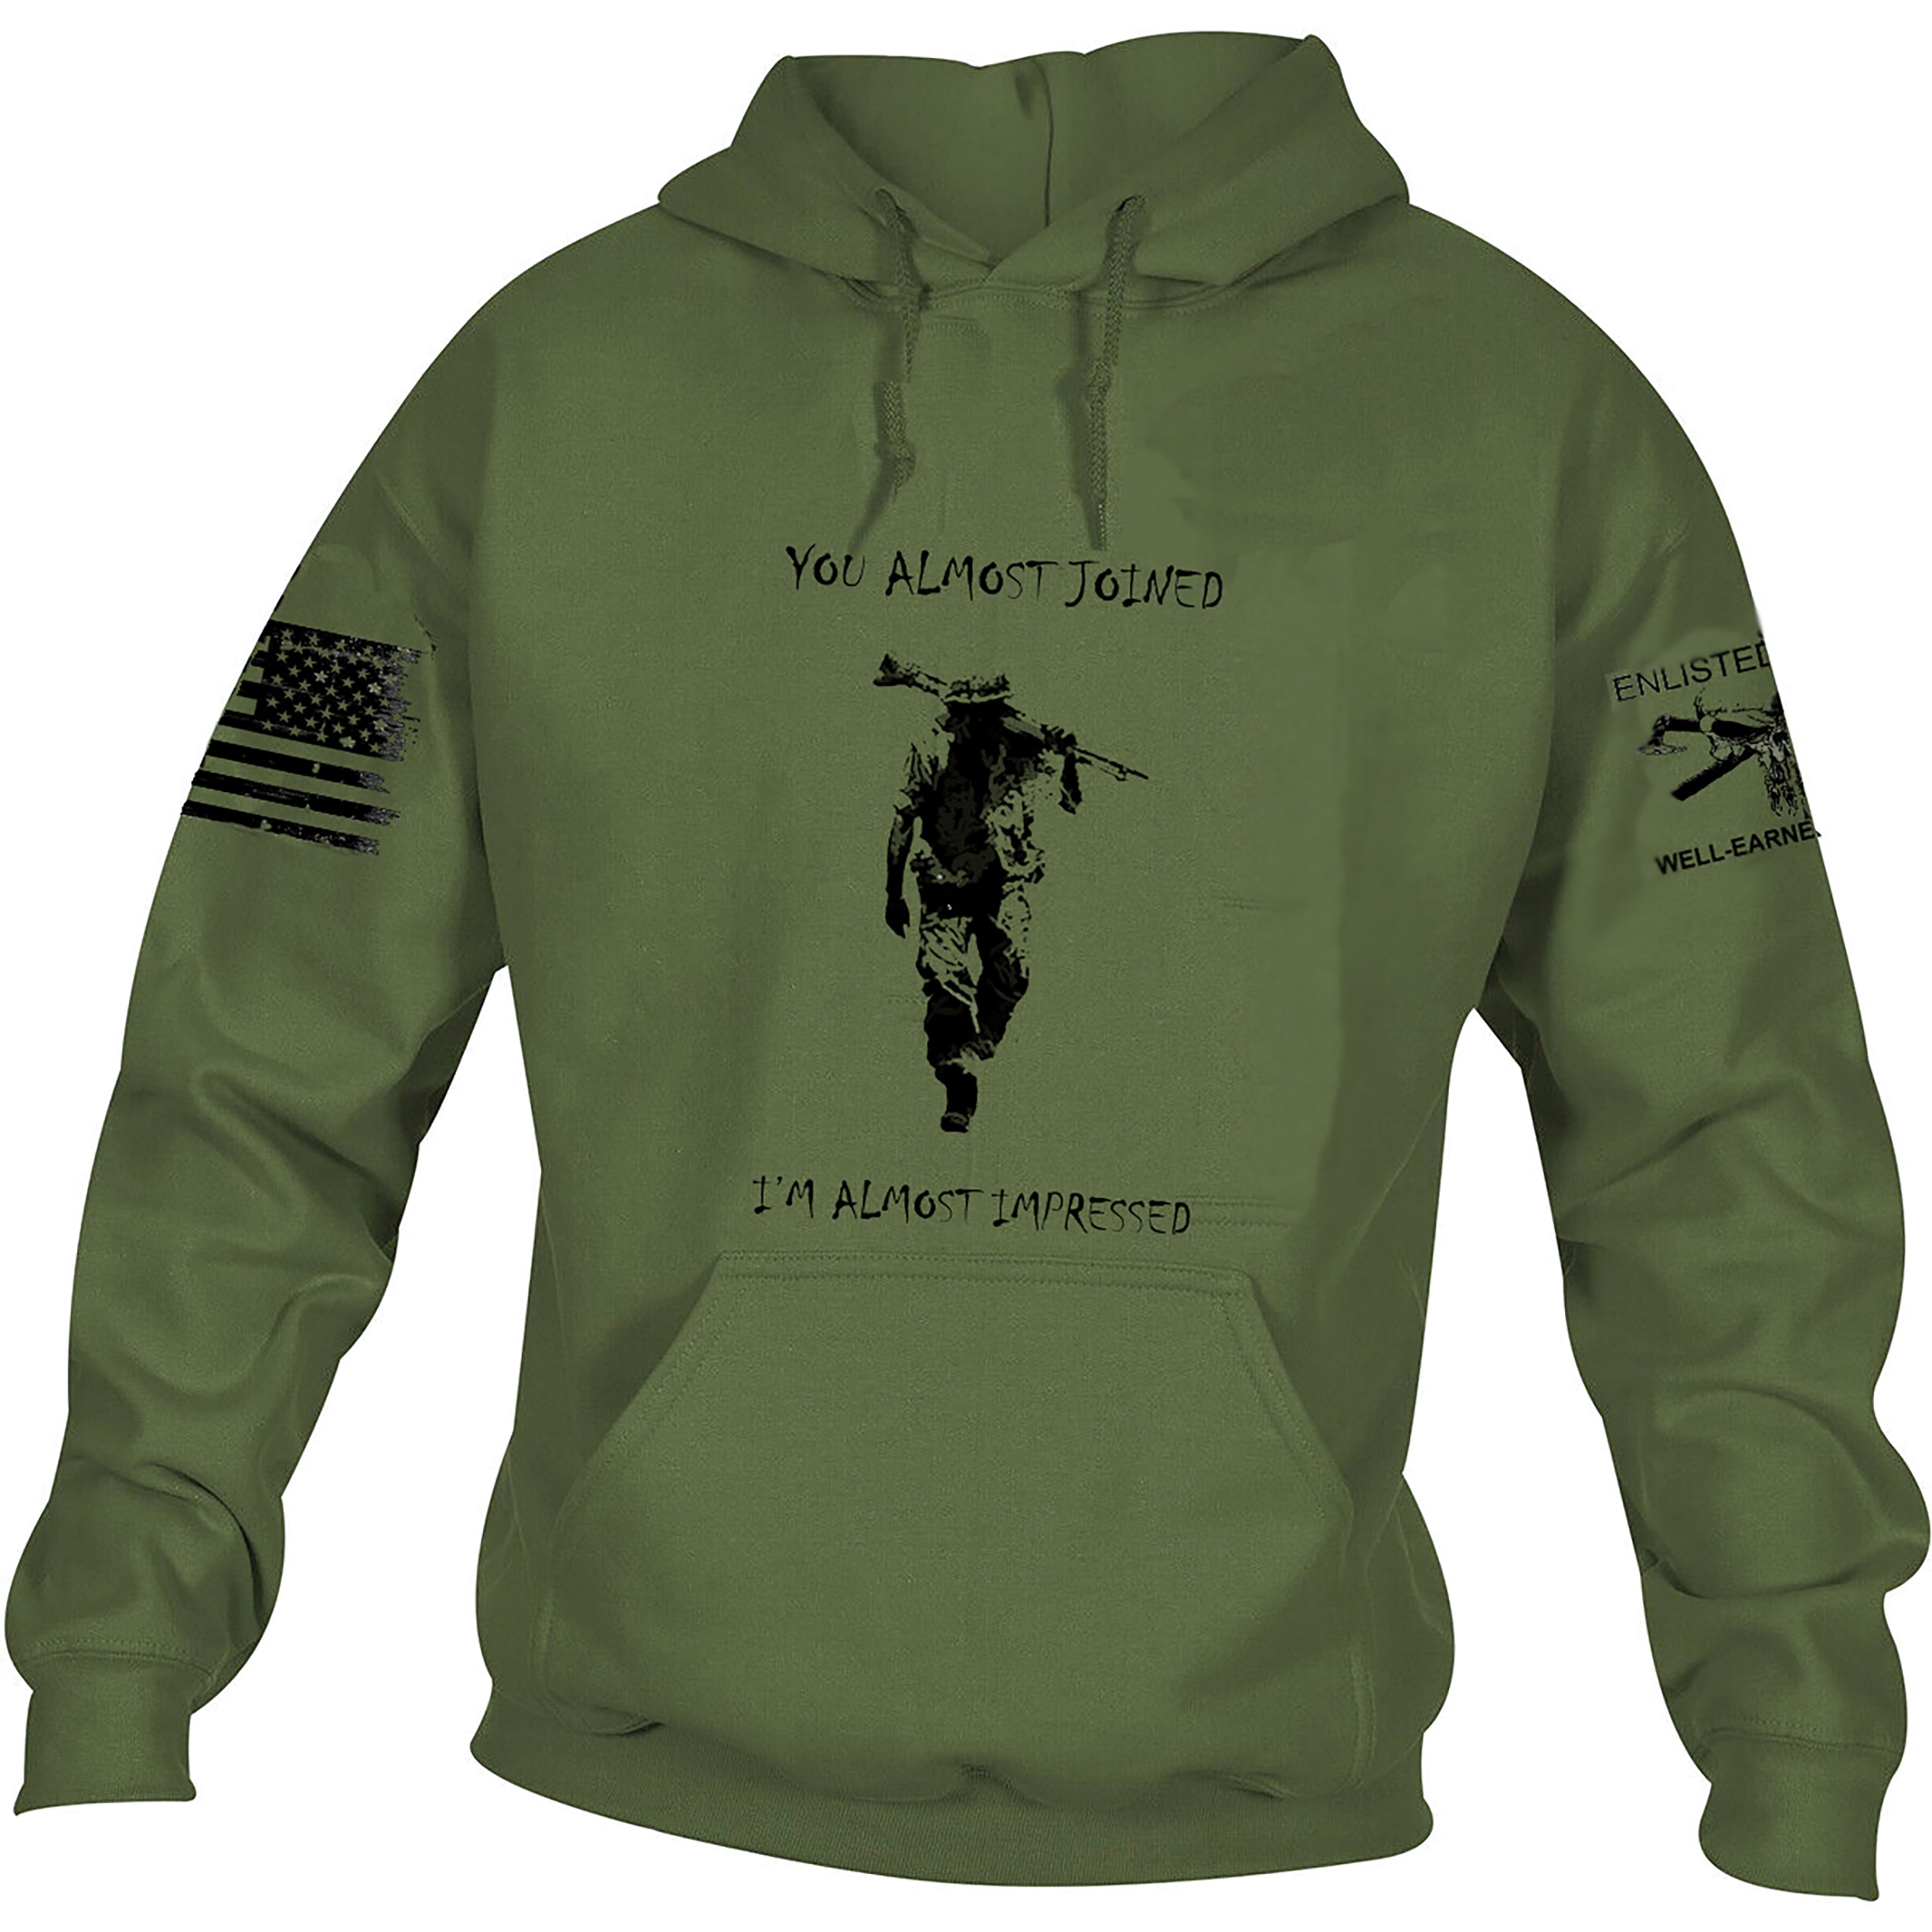 ALMOST, Hoodie, Military Green